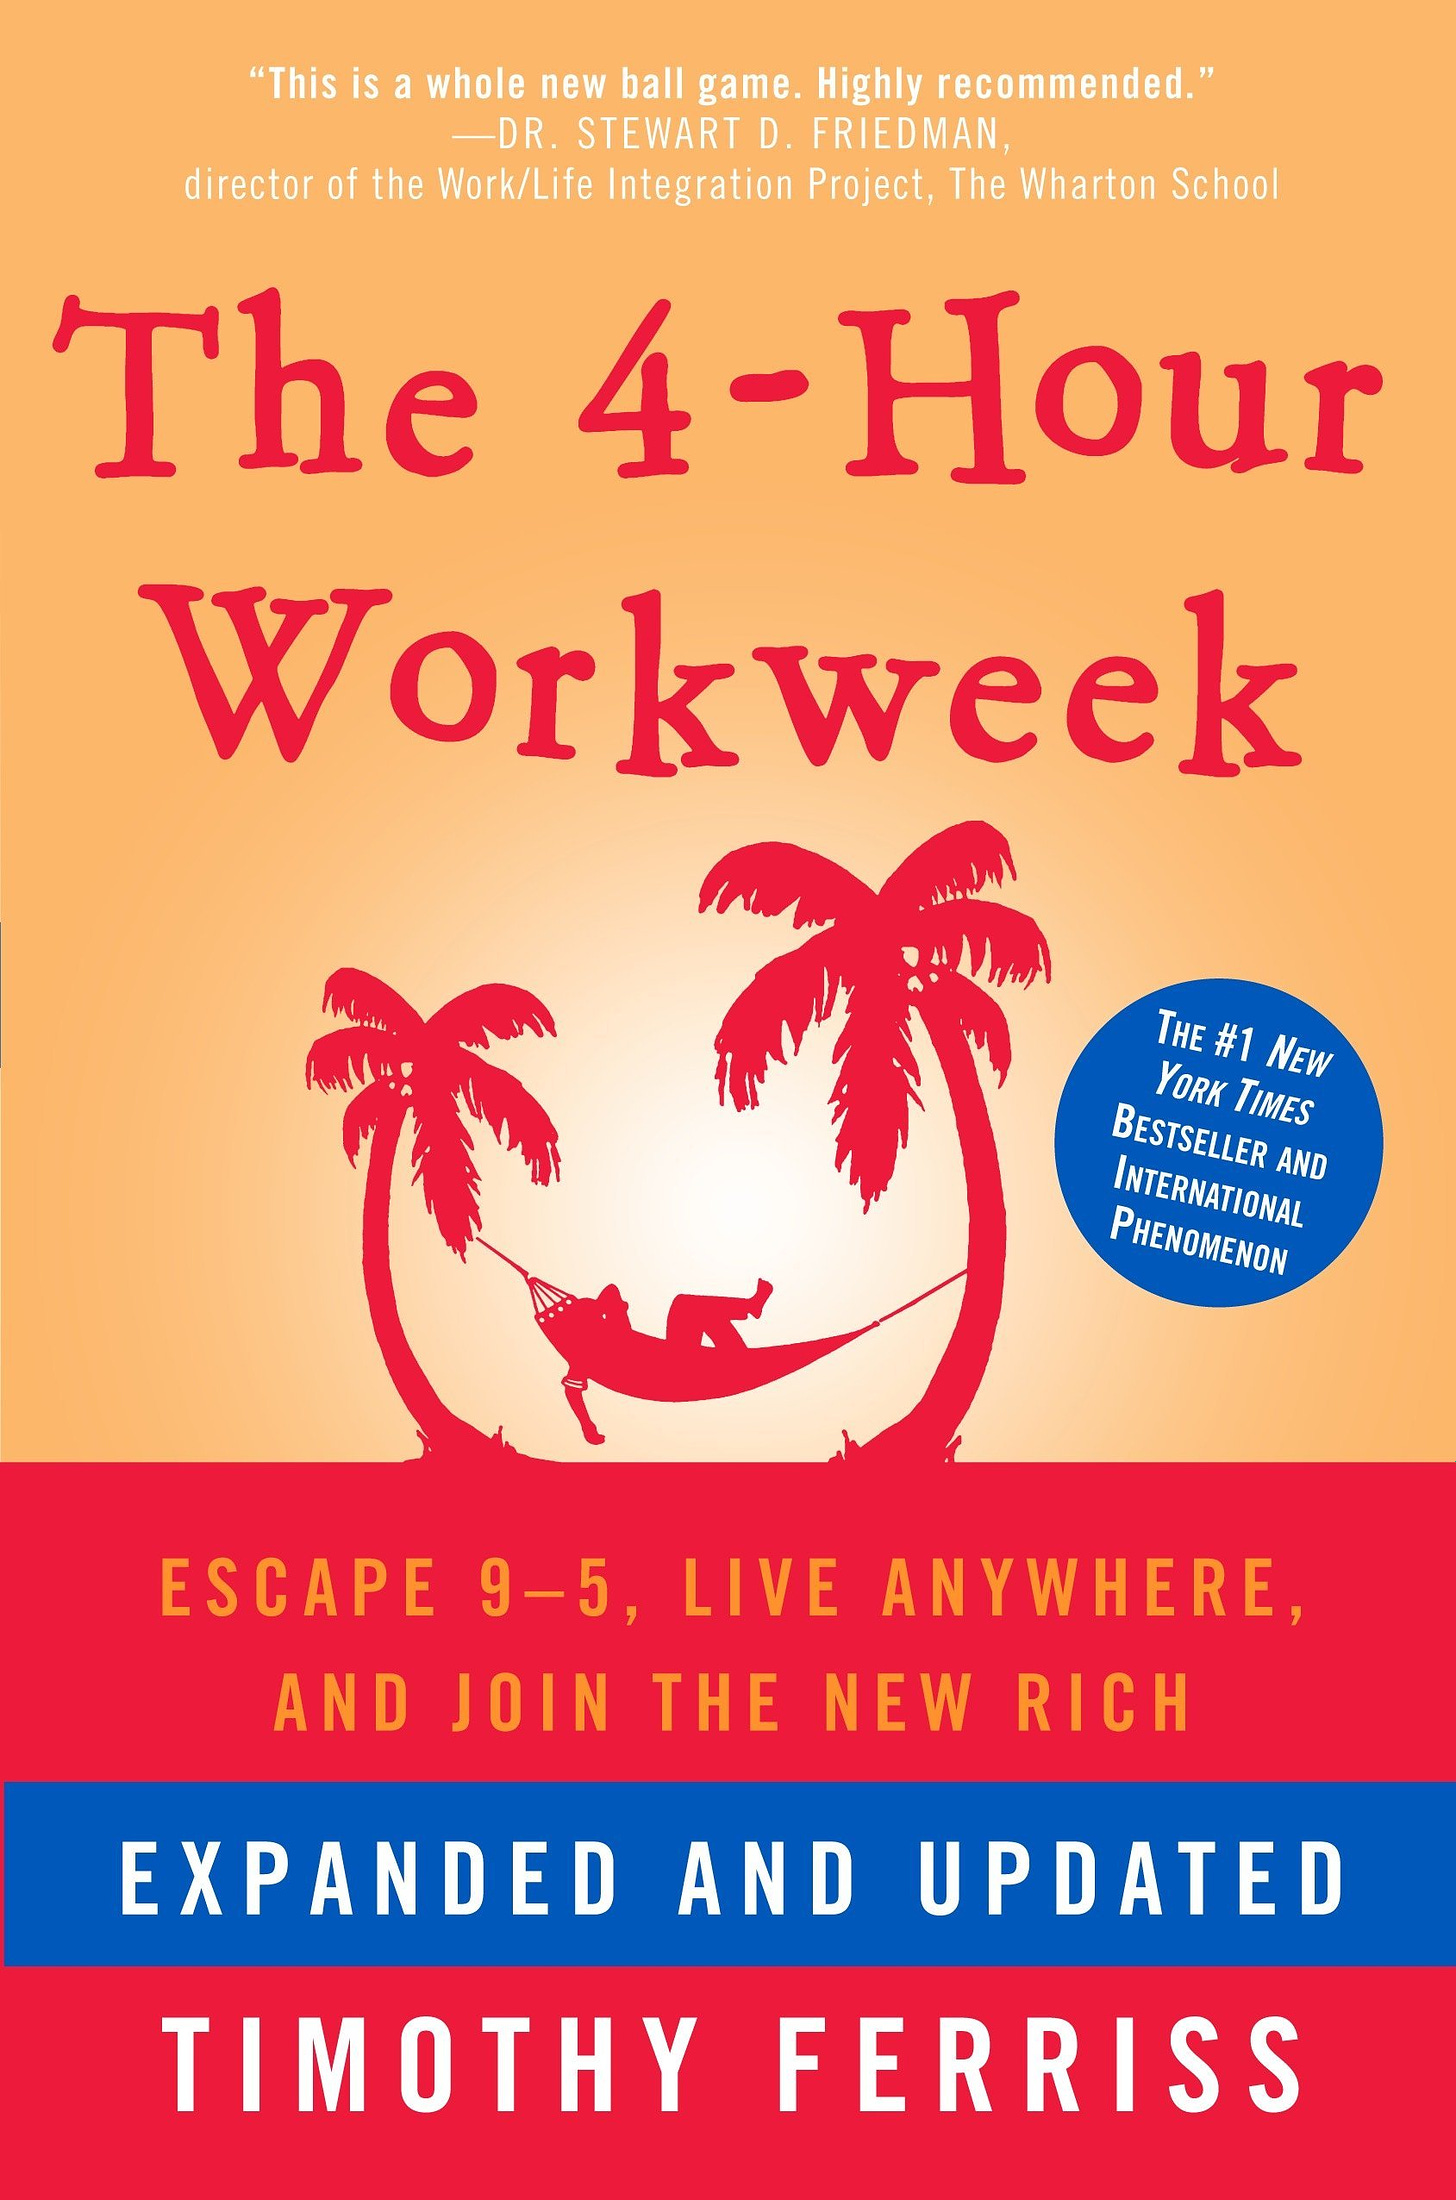 The 4-Hour Workweek: Escape 9-5, Live Anywhere, and Join the New Rich:  Ferriss, Timothy: 9780307465351: Amazon.com ...